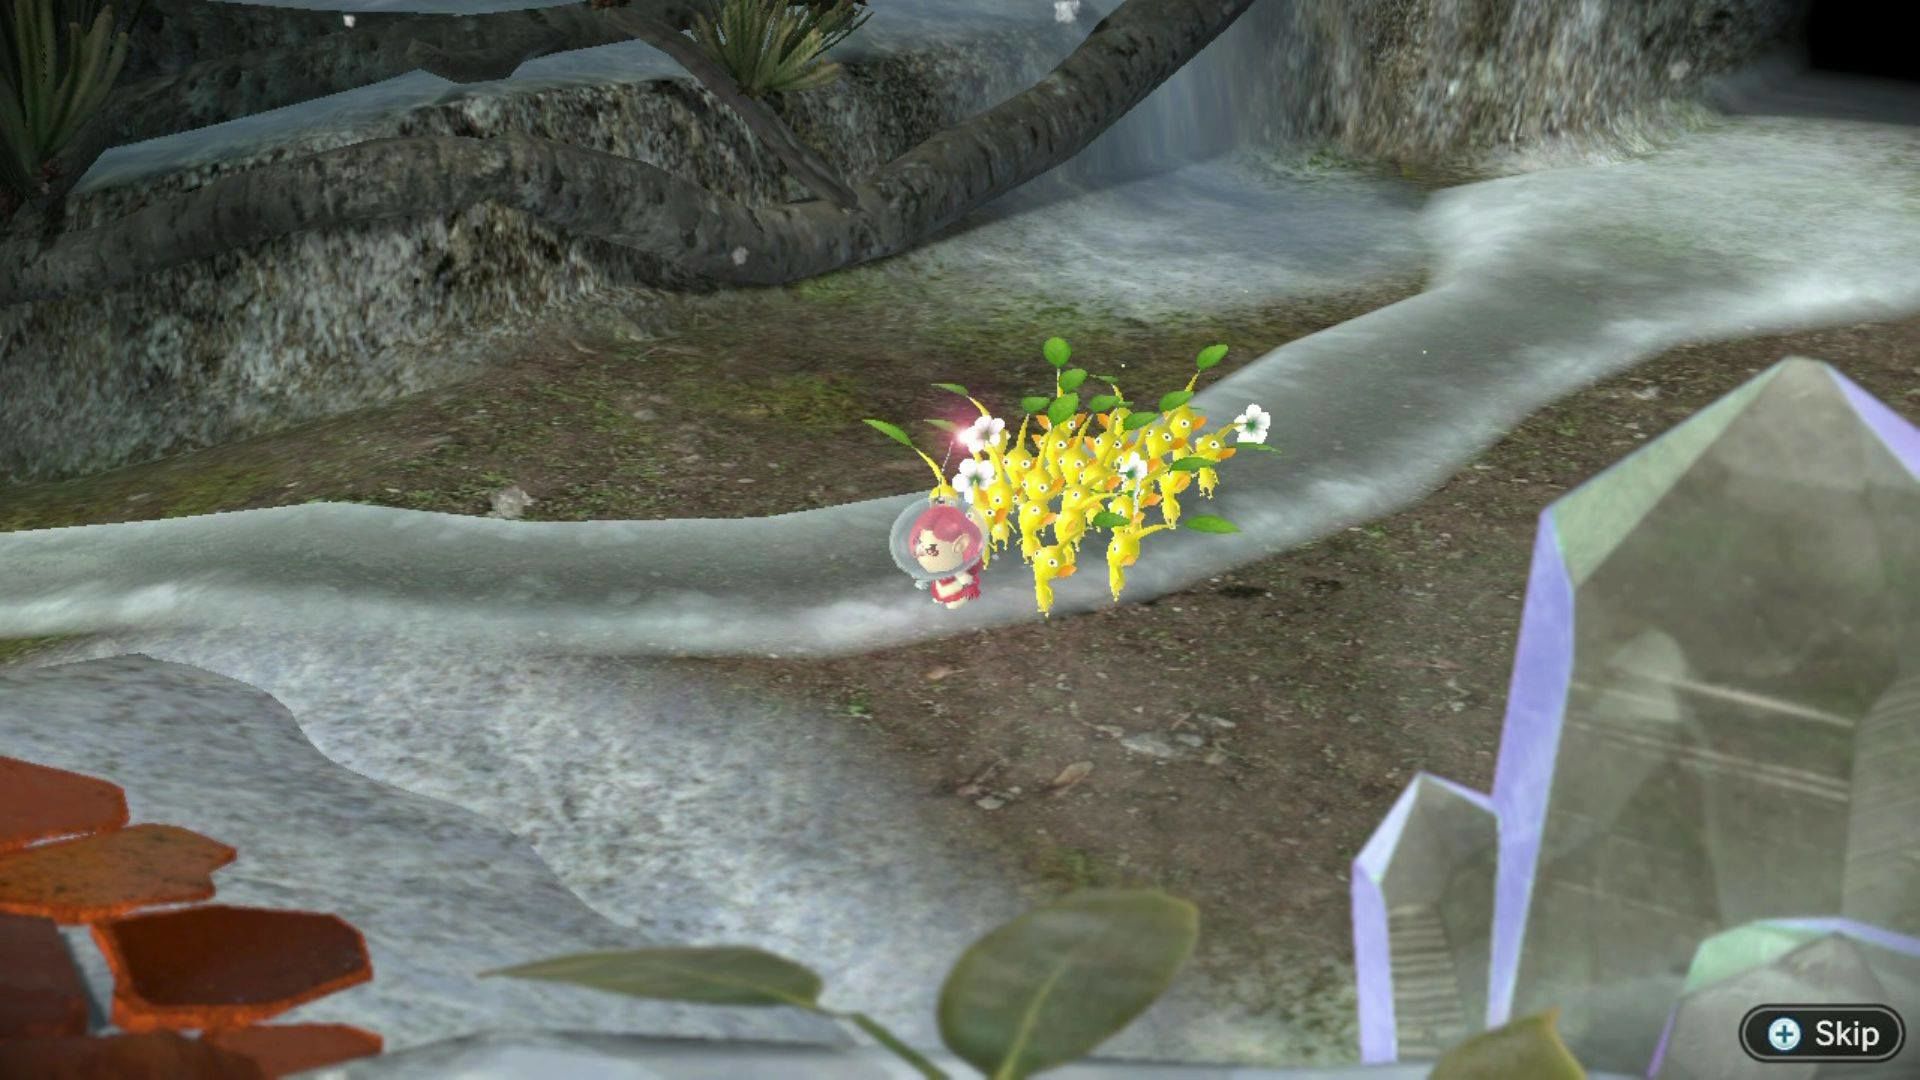 Pikmin 3 Deluxe inceleme